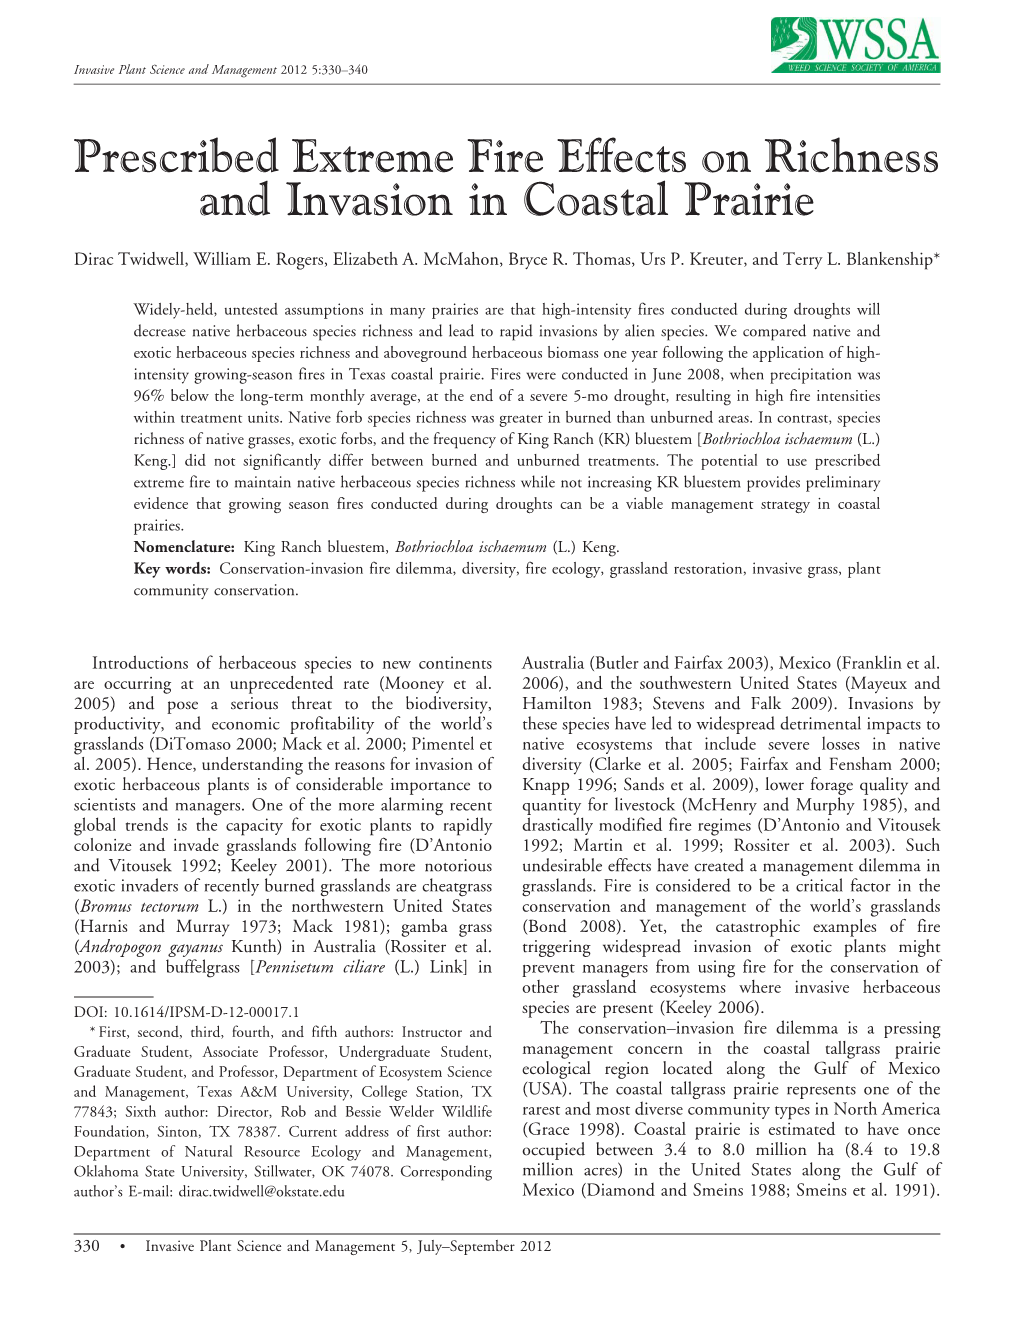 Prescribed Extreme Fire Effects on Richness and Invasion in Coastal Prairie